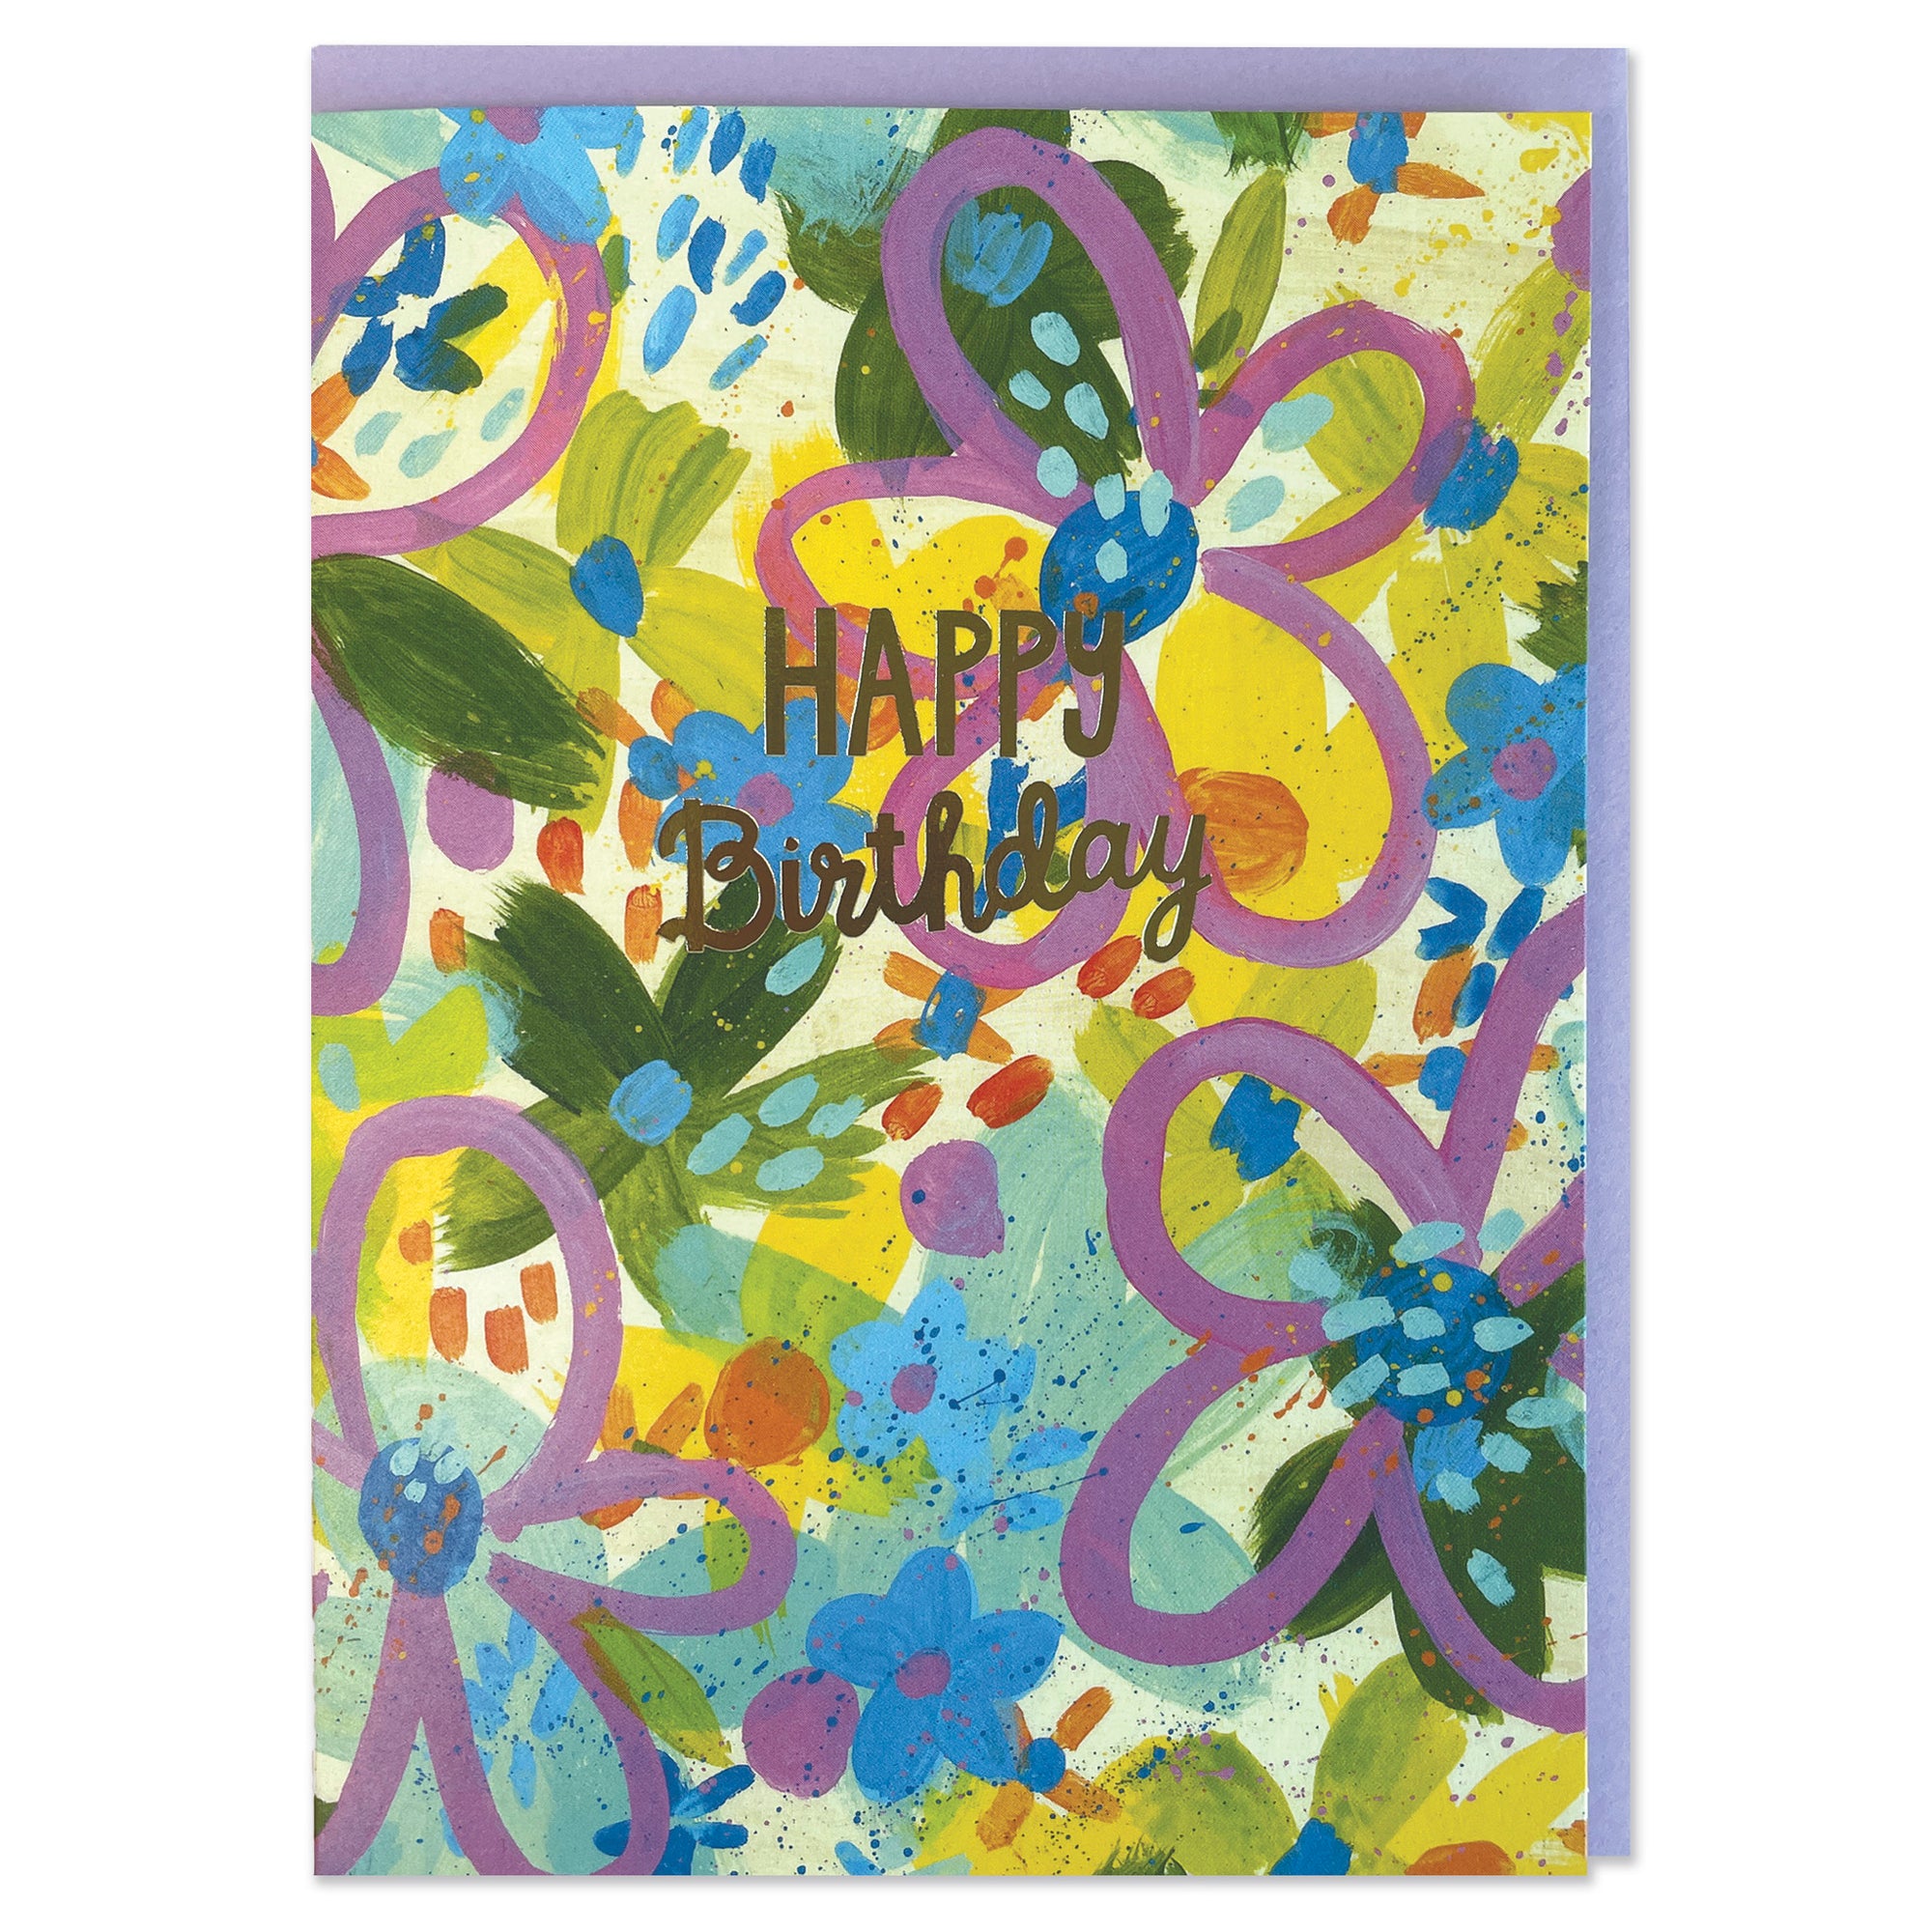 A colourful abstract painted floral greetings card to celebrate a birthday. The writing in the centre of the card is gold foil cursive writing stating 'Happy Birthday'.